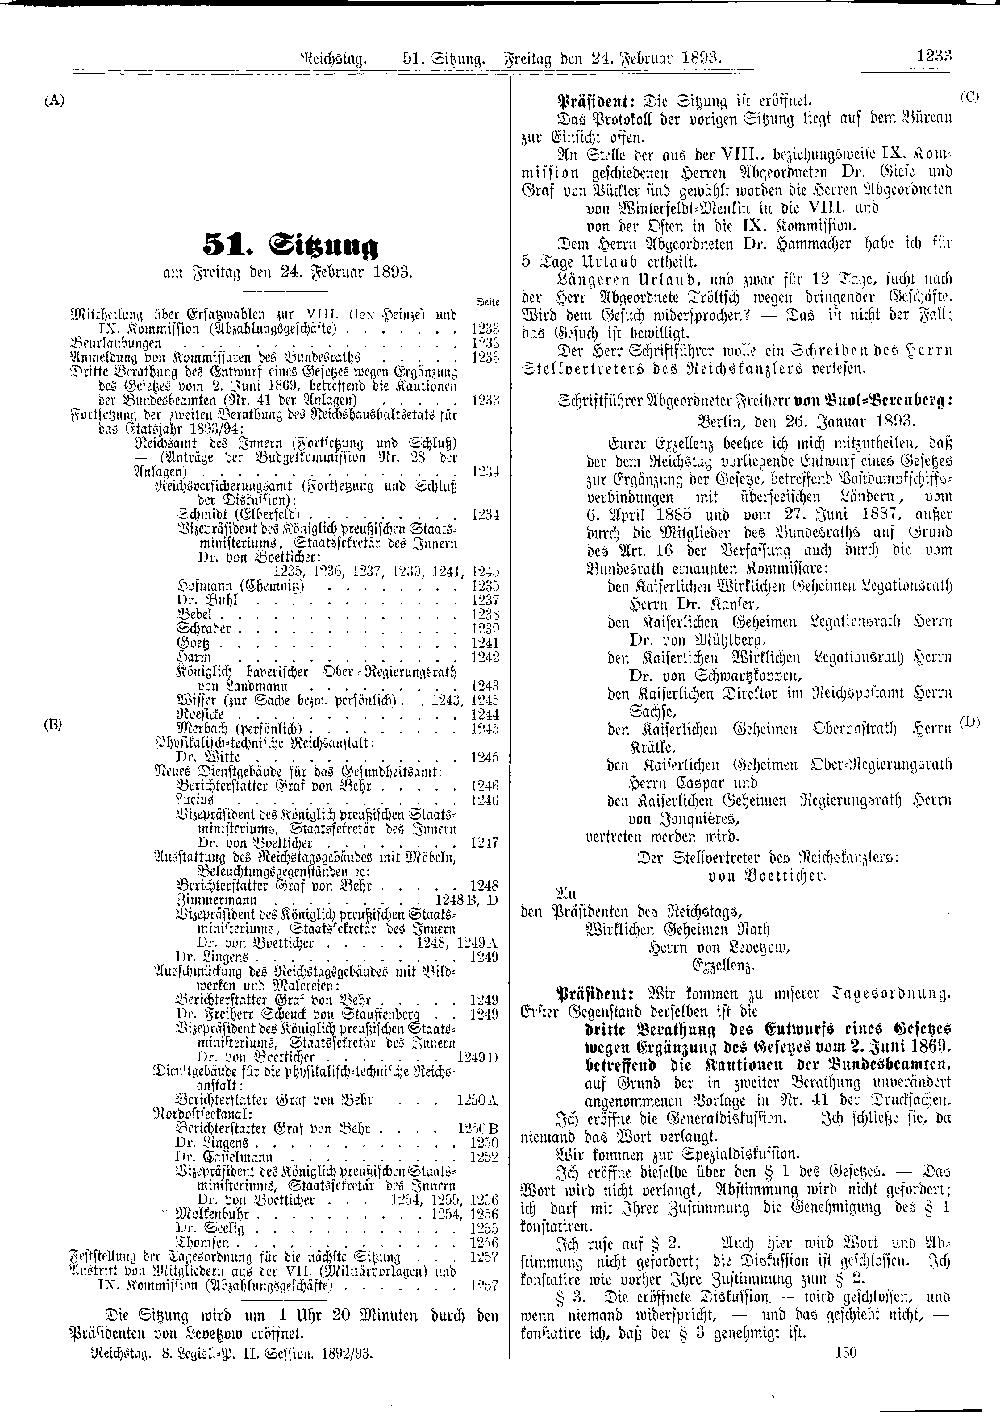 Scan of page 1233